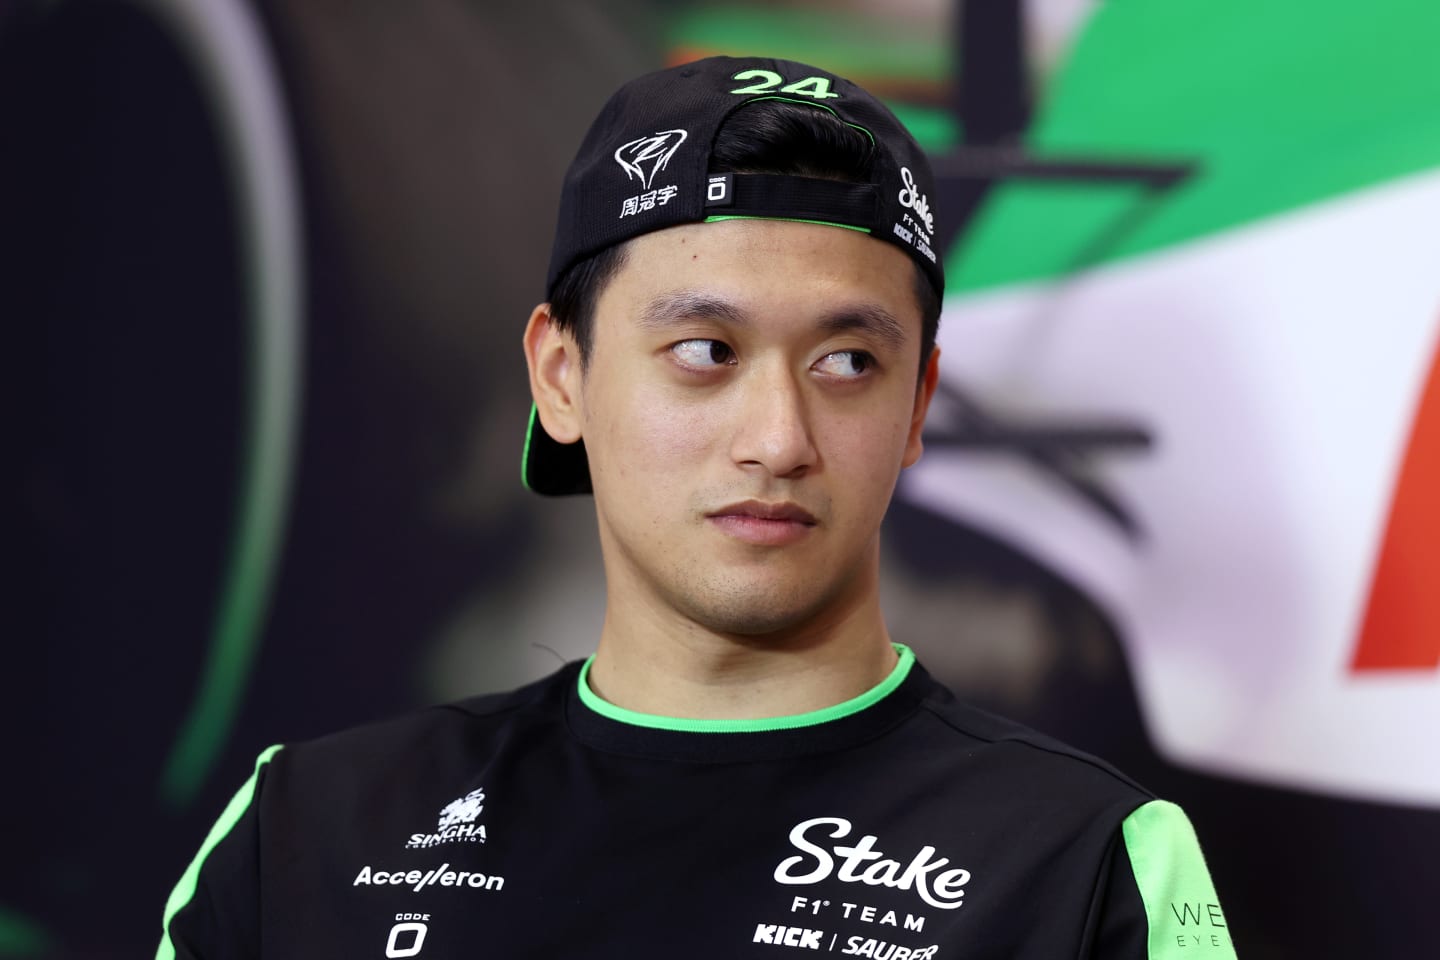 IMOLA, ITALY - MAY 16: Zhou Guanyu of China and Stake F1 Team Kick Sauber attends the Drivers Press Conference during previews ahead of the F1 Grand Prix of Emilia-Romagna at Autodromo Enzo e Dino Ferrari Circuit on May 16, 2024 in Imola, Italy. (Photo by Lars Baron/Getty Images)